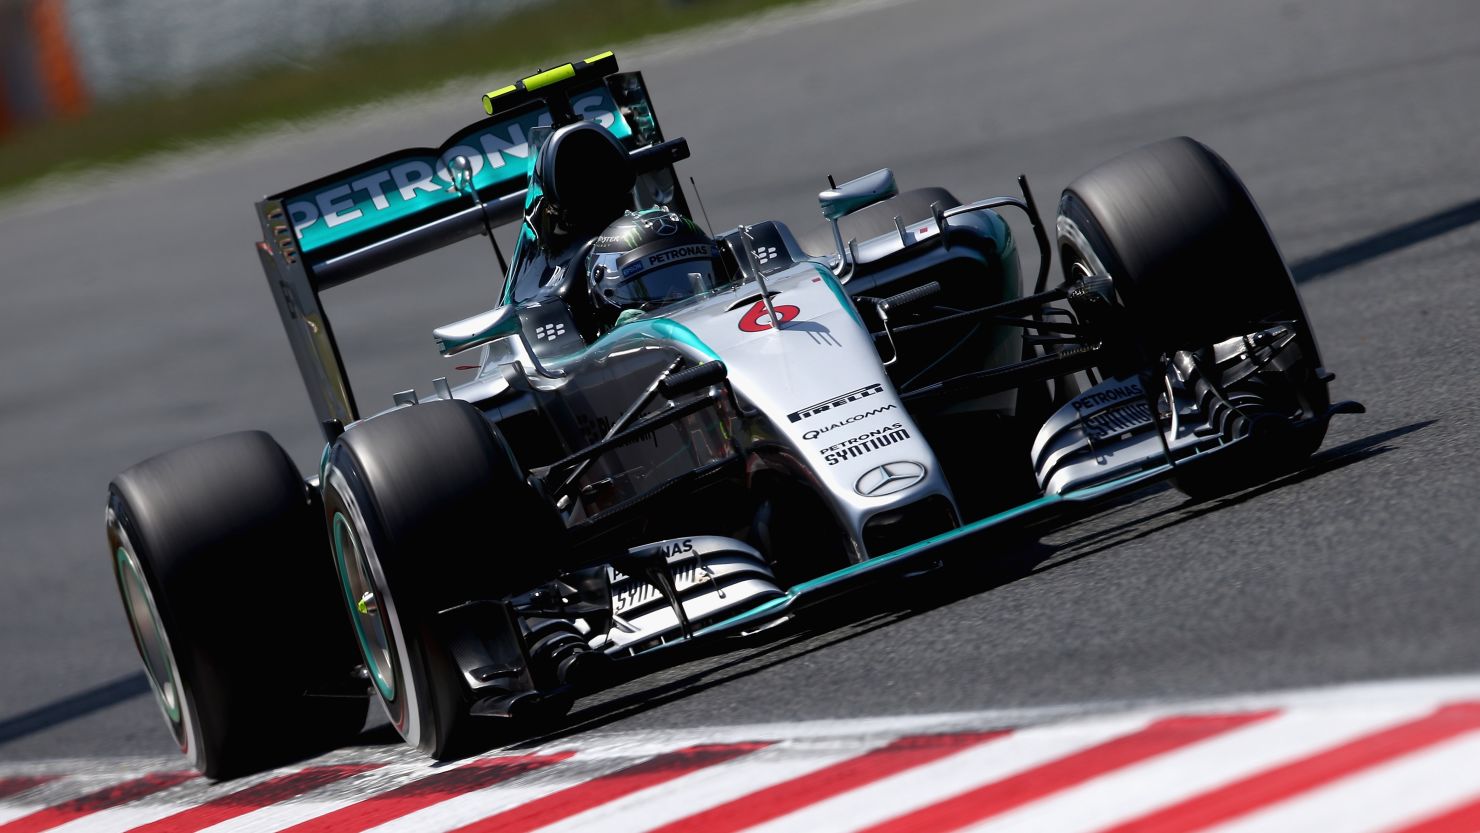 Nico Rosberg headed the timesheets during Saturday's qualifying for the Spanish Grand Prix.